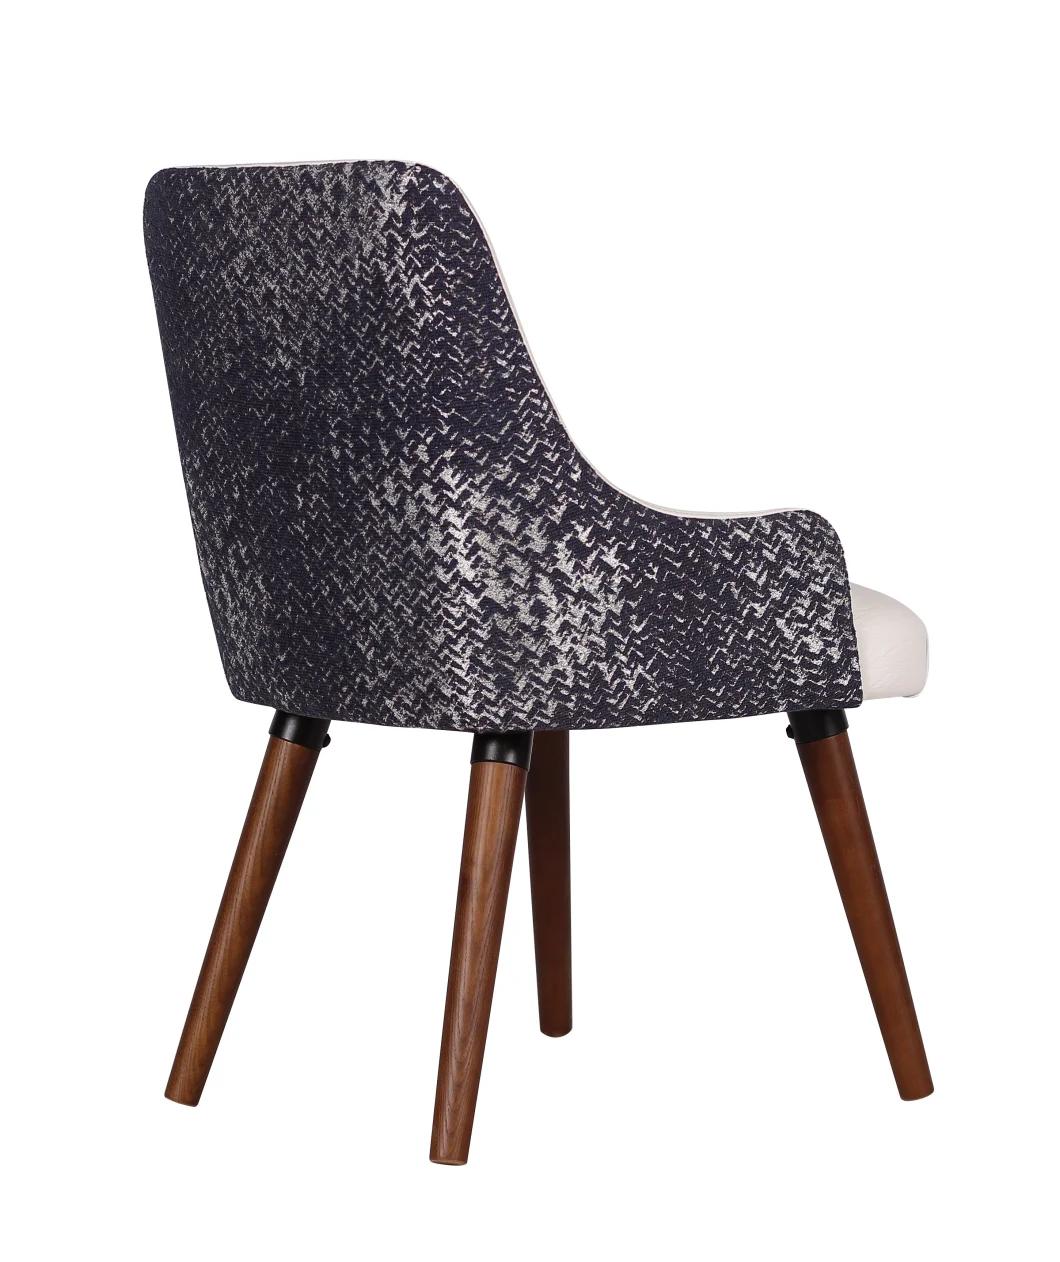 Modern Restaurant Knocked Down Wood Legs Fabric Upholstery Dining Chair